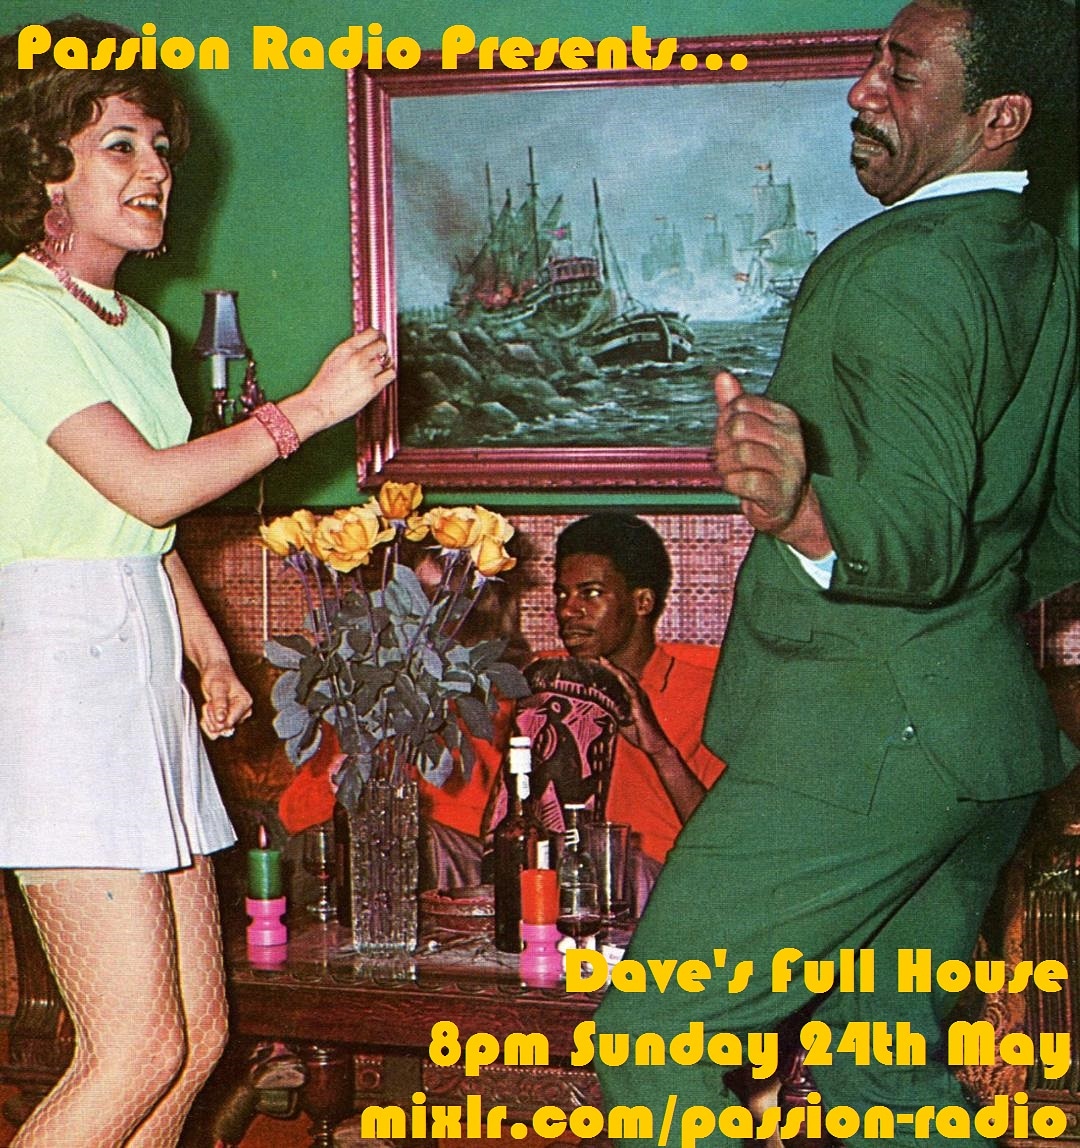 Can't wait for this Sunday evening. If you're in and about. Get yourself some beers and tune into @passionradiomix for an eclectic blend of tunes from the late 50s to the present day...
#passionradio #davesfullhouse 

mixlr.com/passion-radio